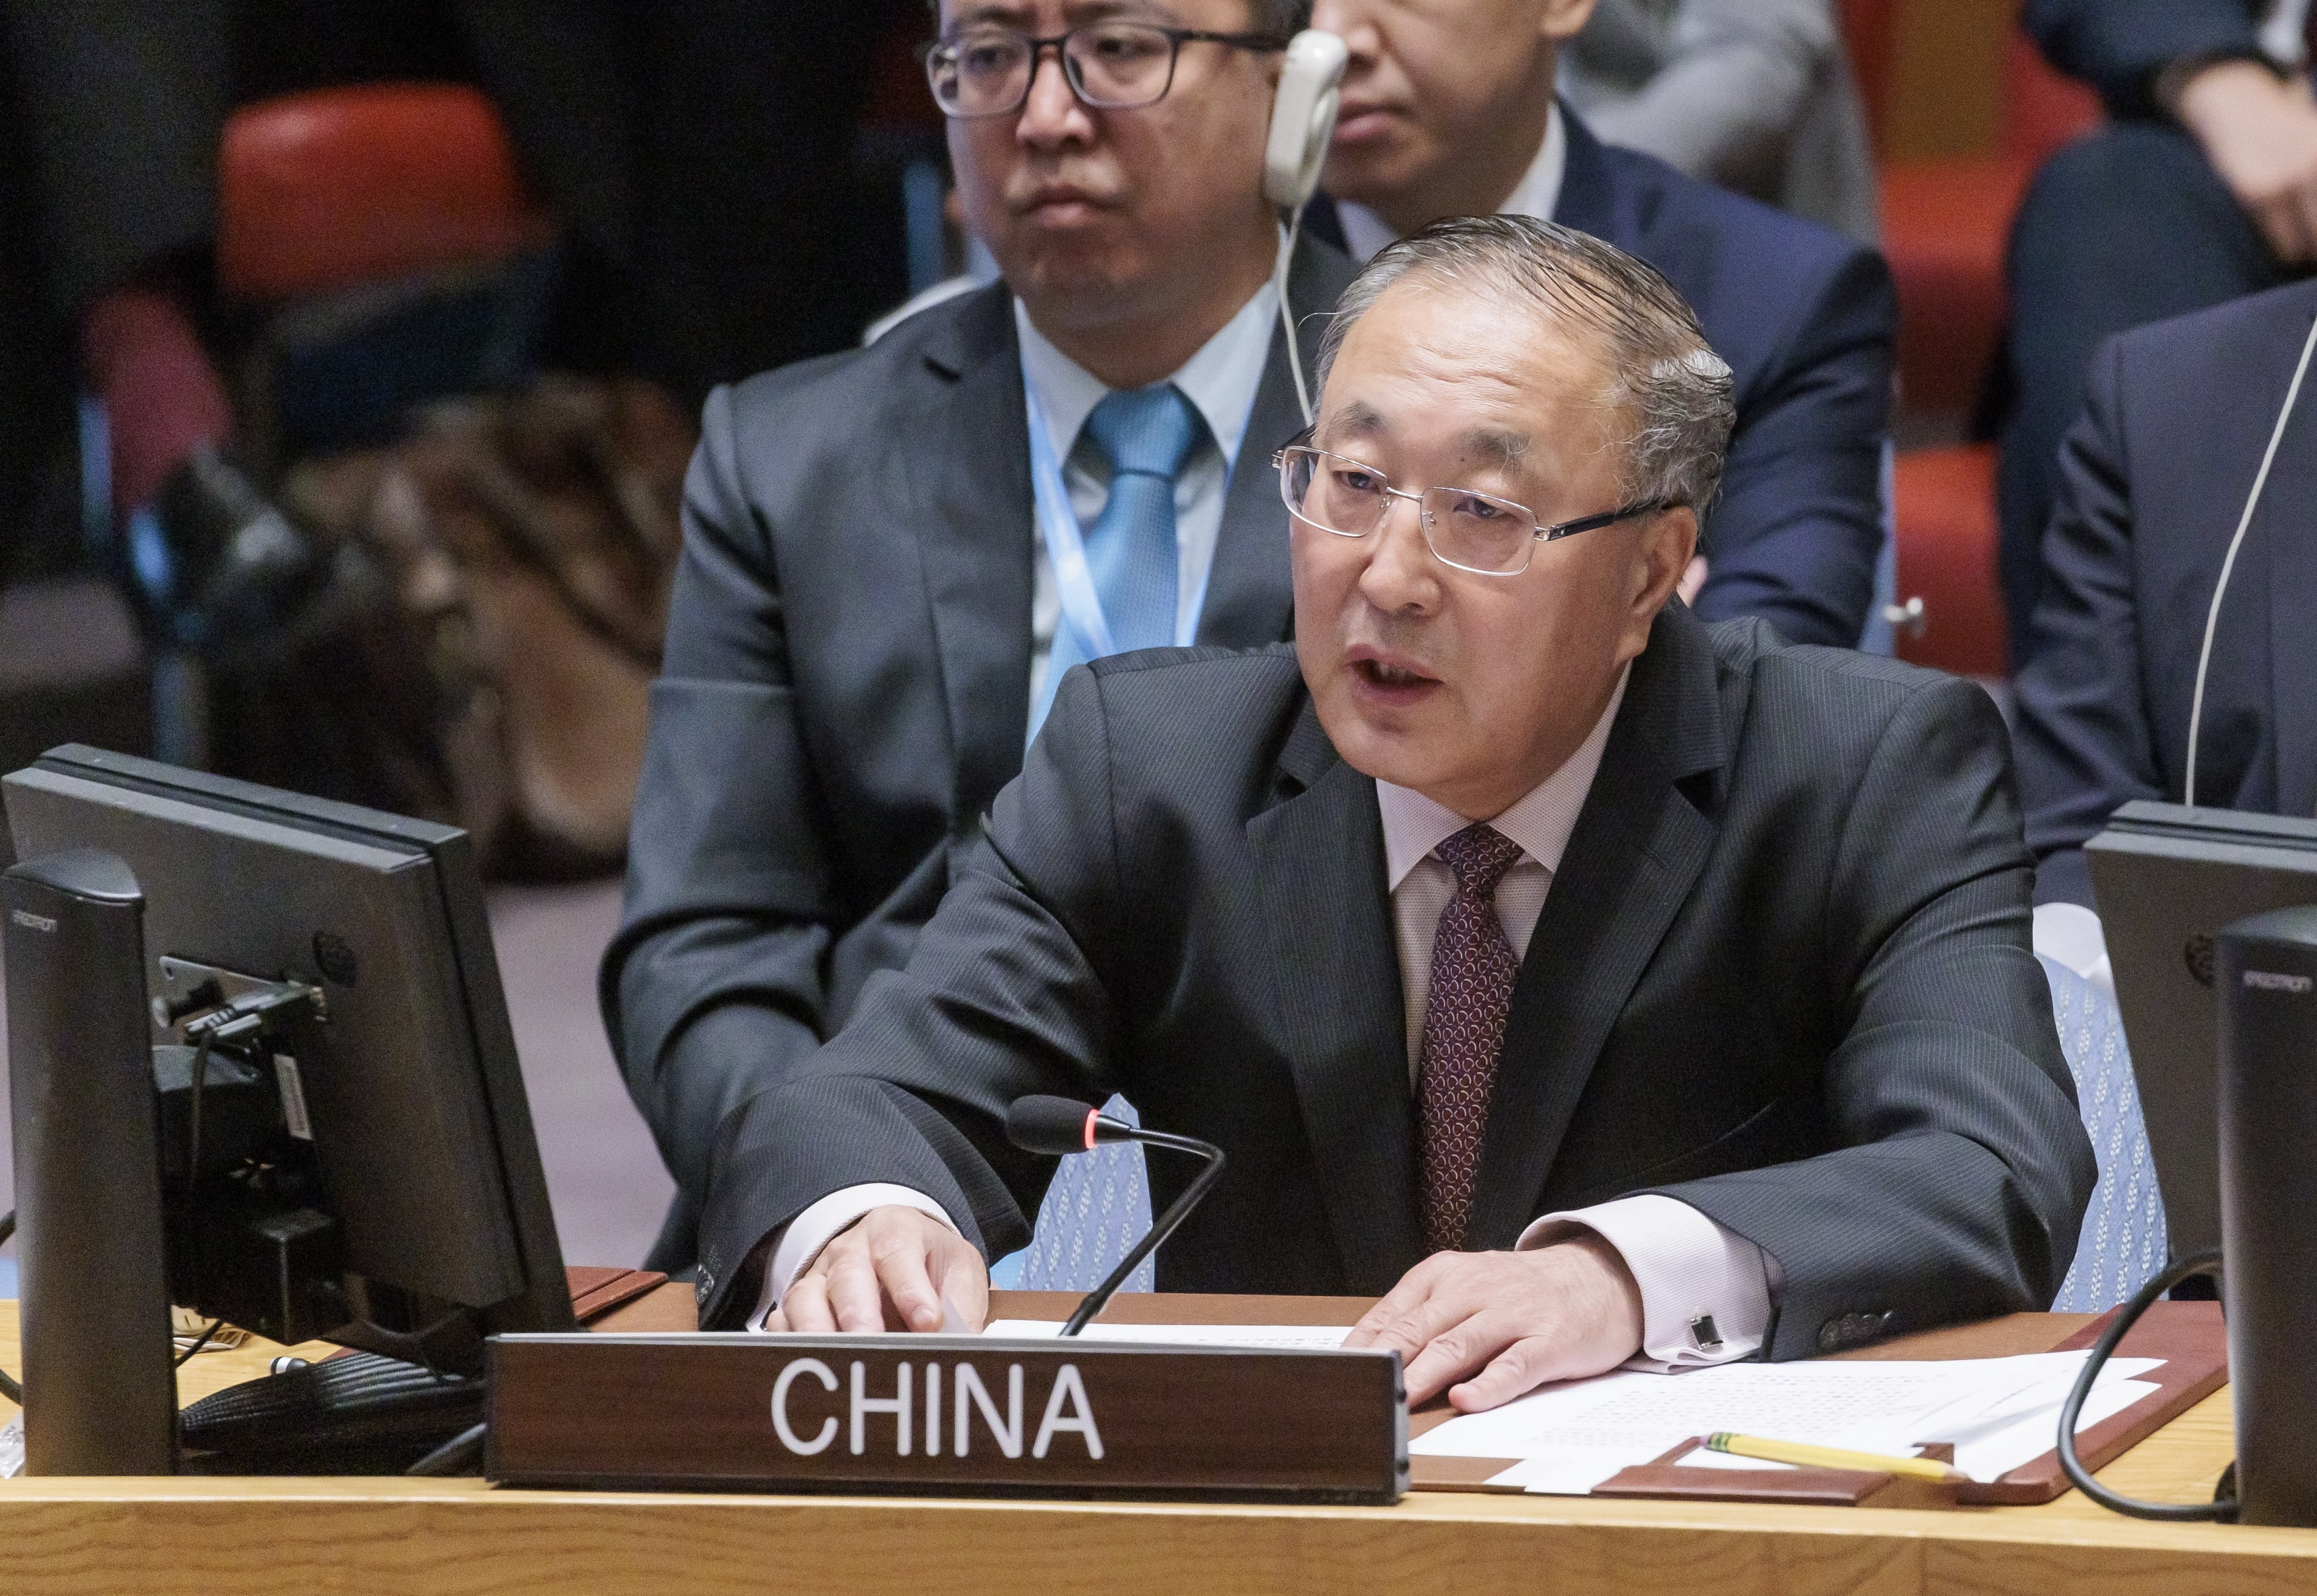 Zhang Jun, China’s ambassador to the United Nations, speaks during the Security Council meeting on artificial intelligence in New York on Tuesday. Photo: EPA-EFE